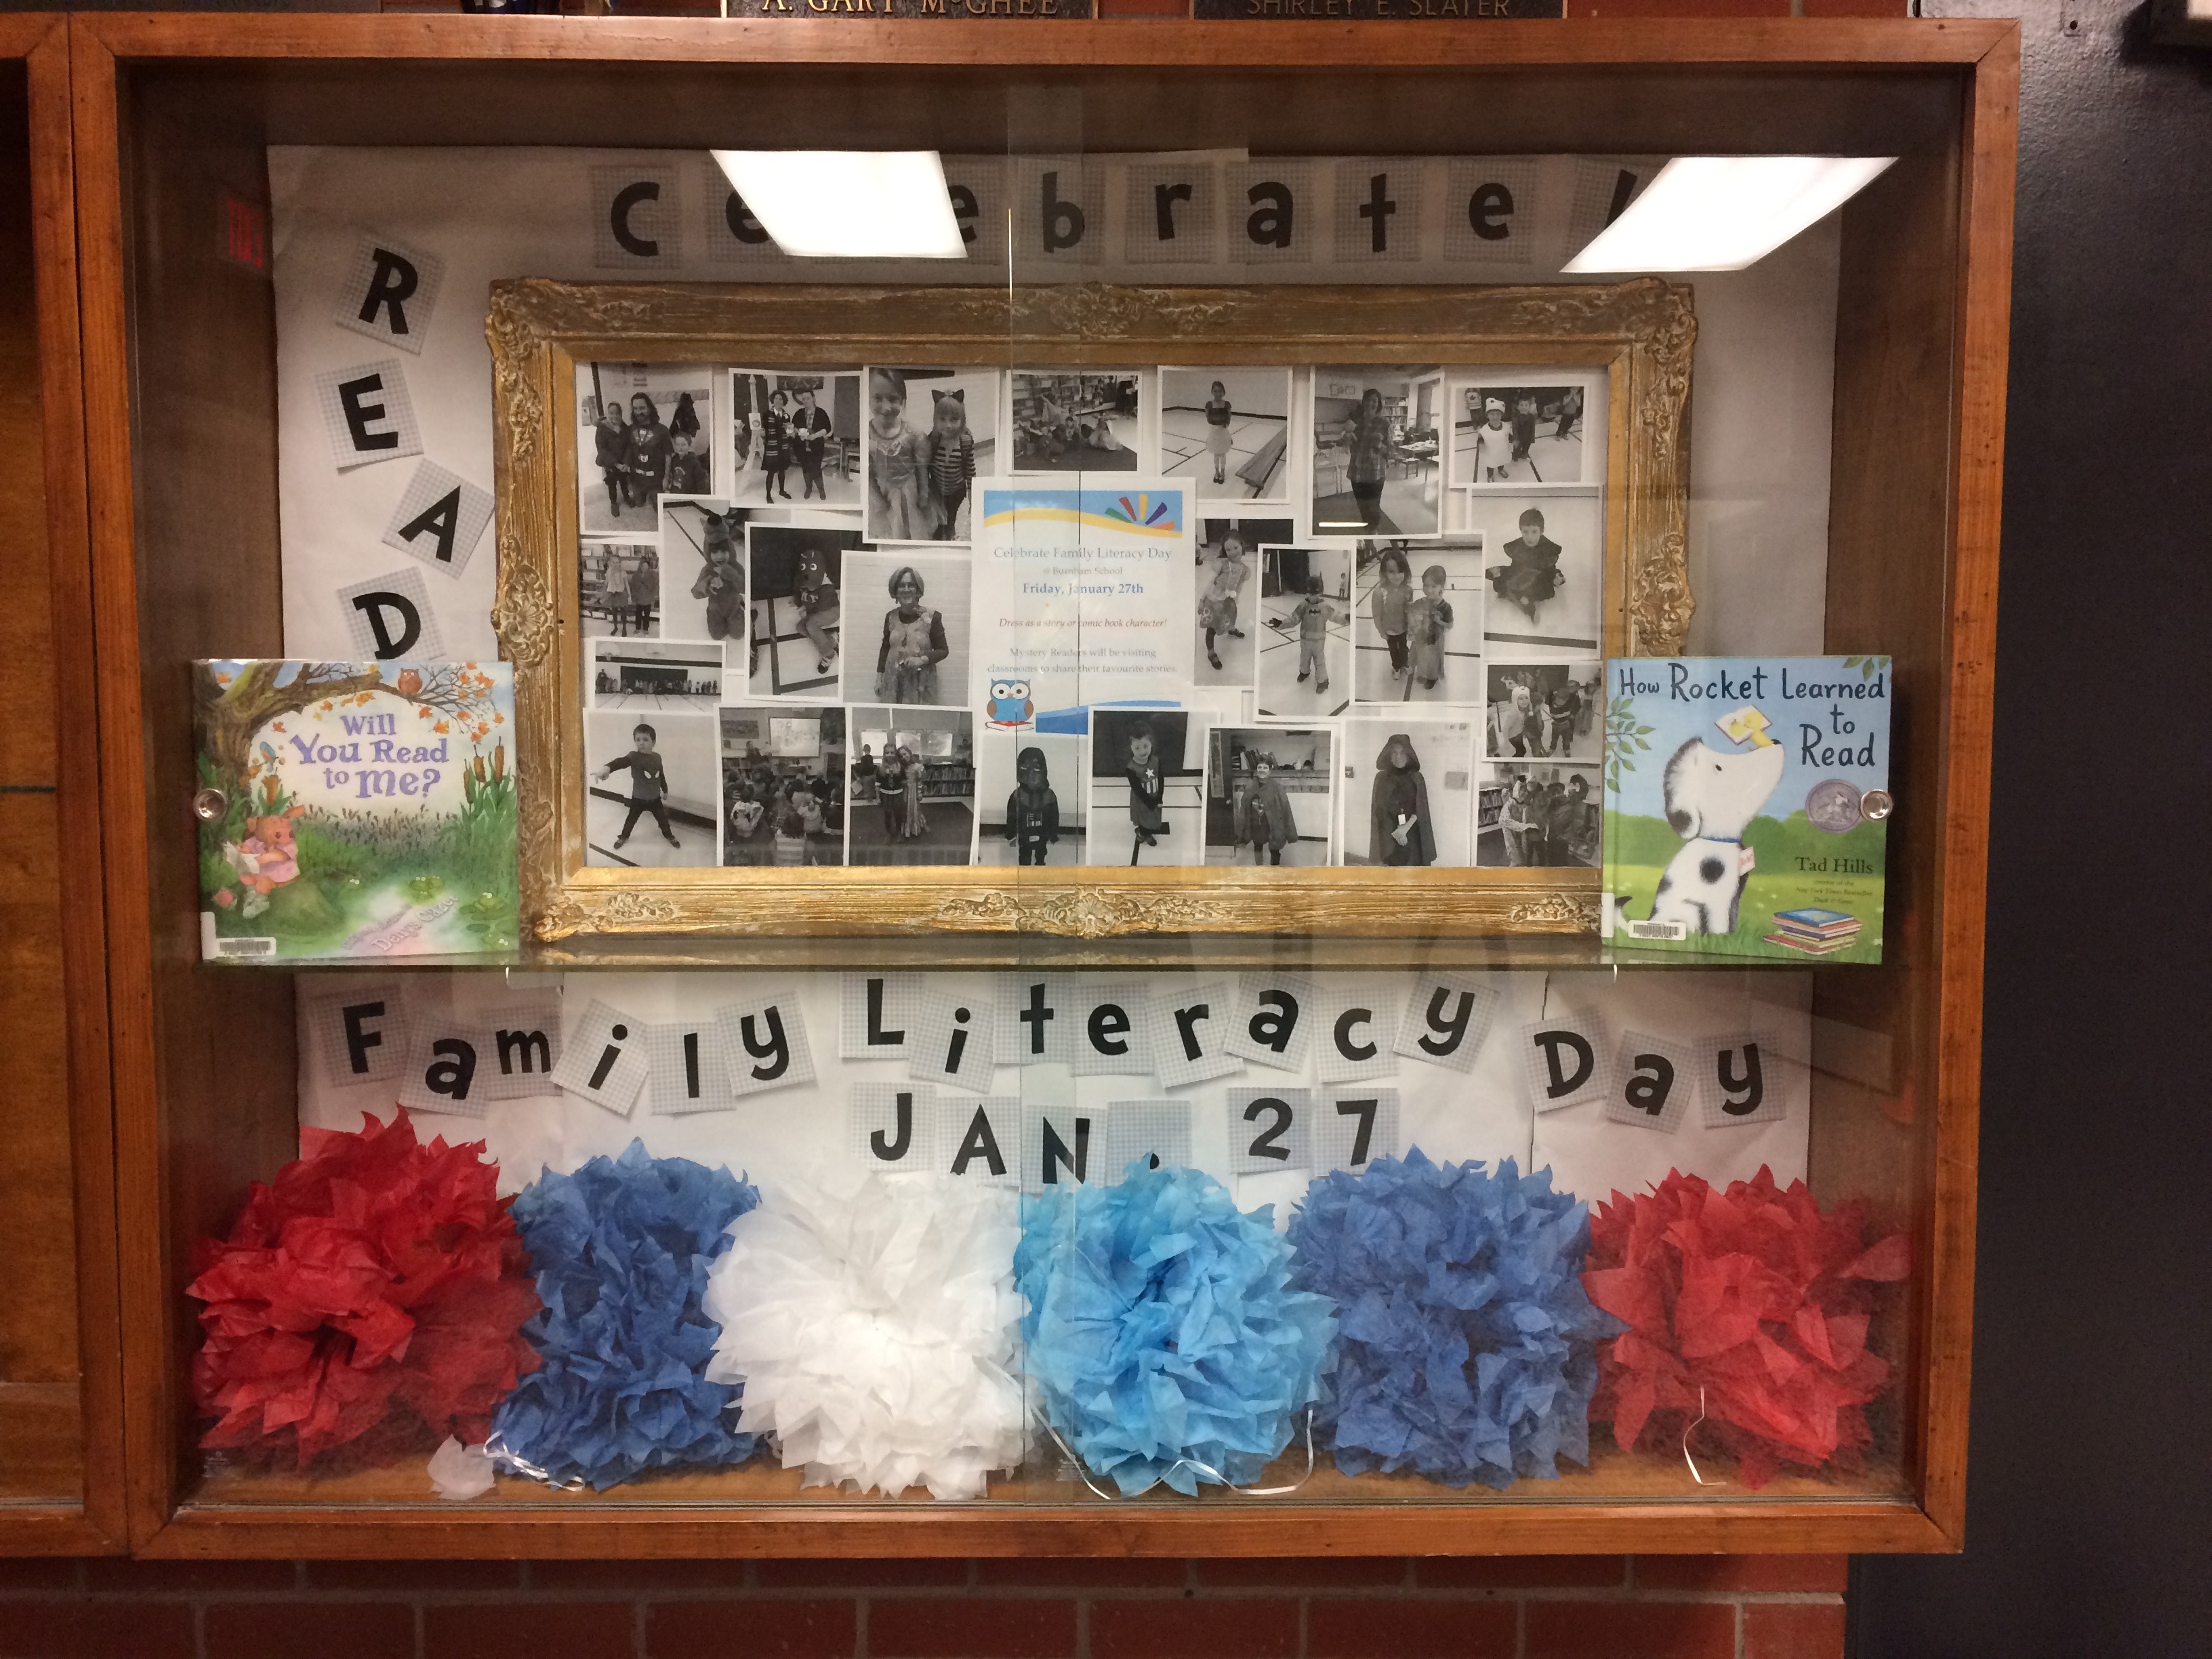 display case with Family Literacy Day pictures and books